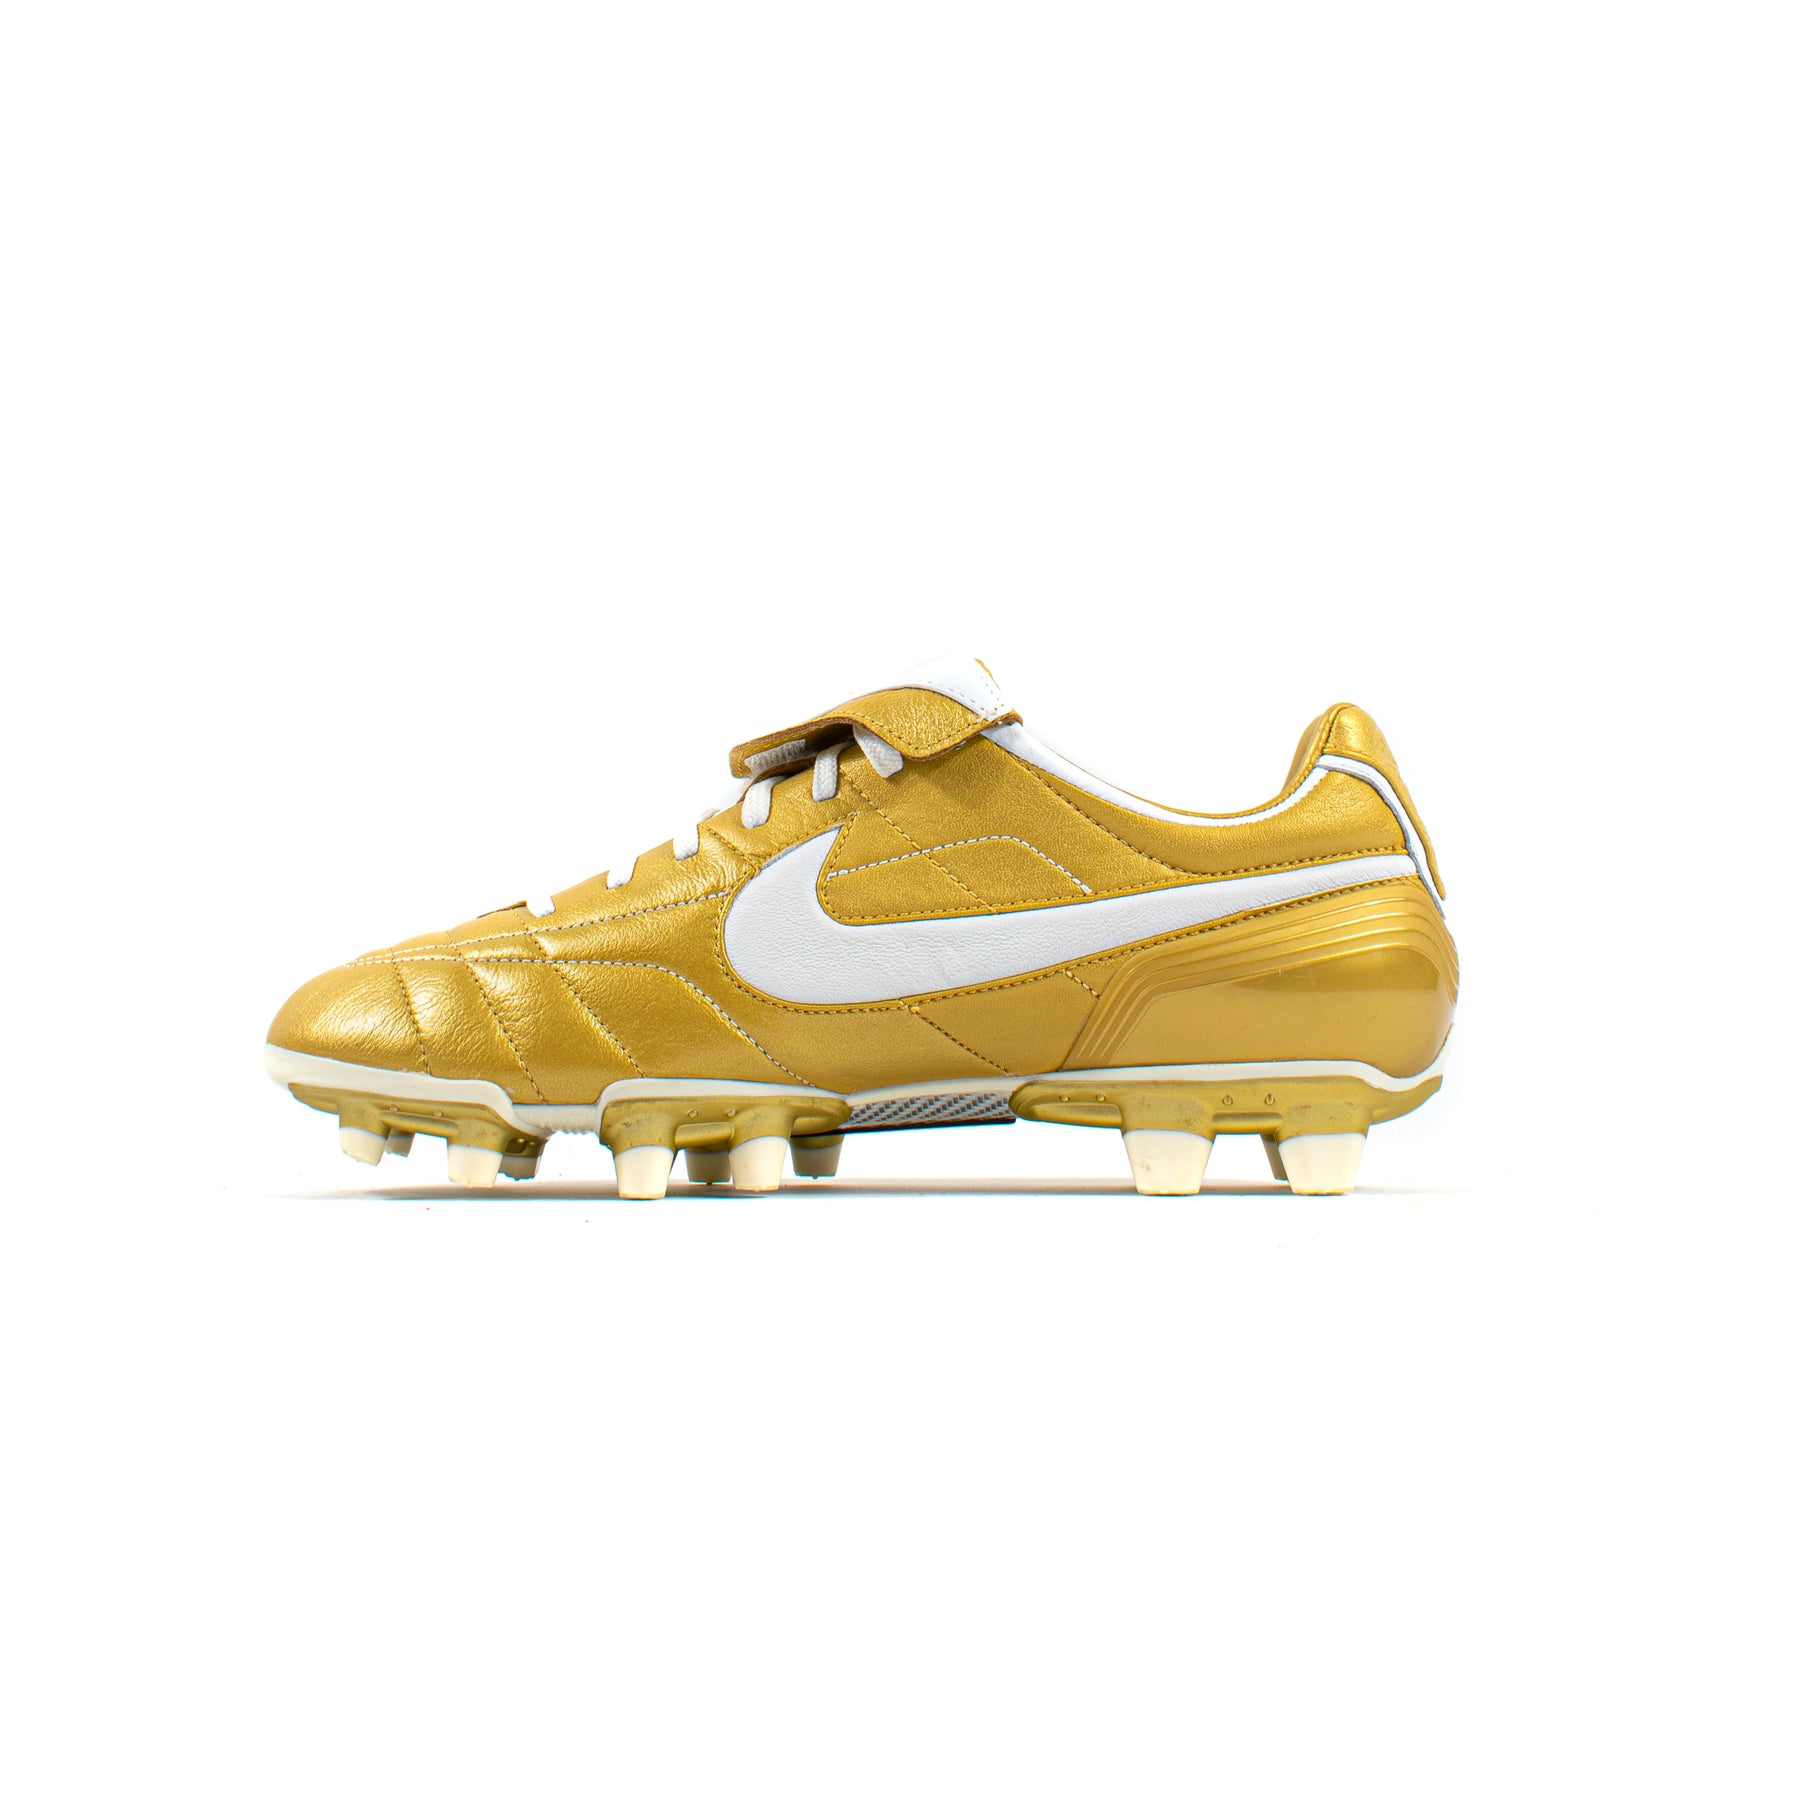 Nike Tiempo Air R10 FG – Classic Soccer Cleats